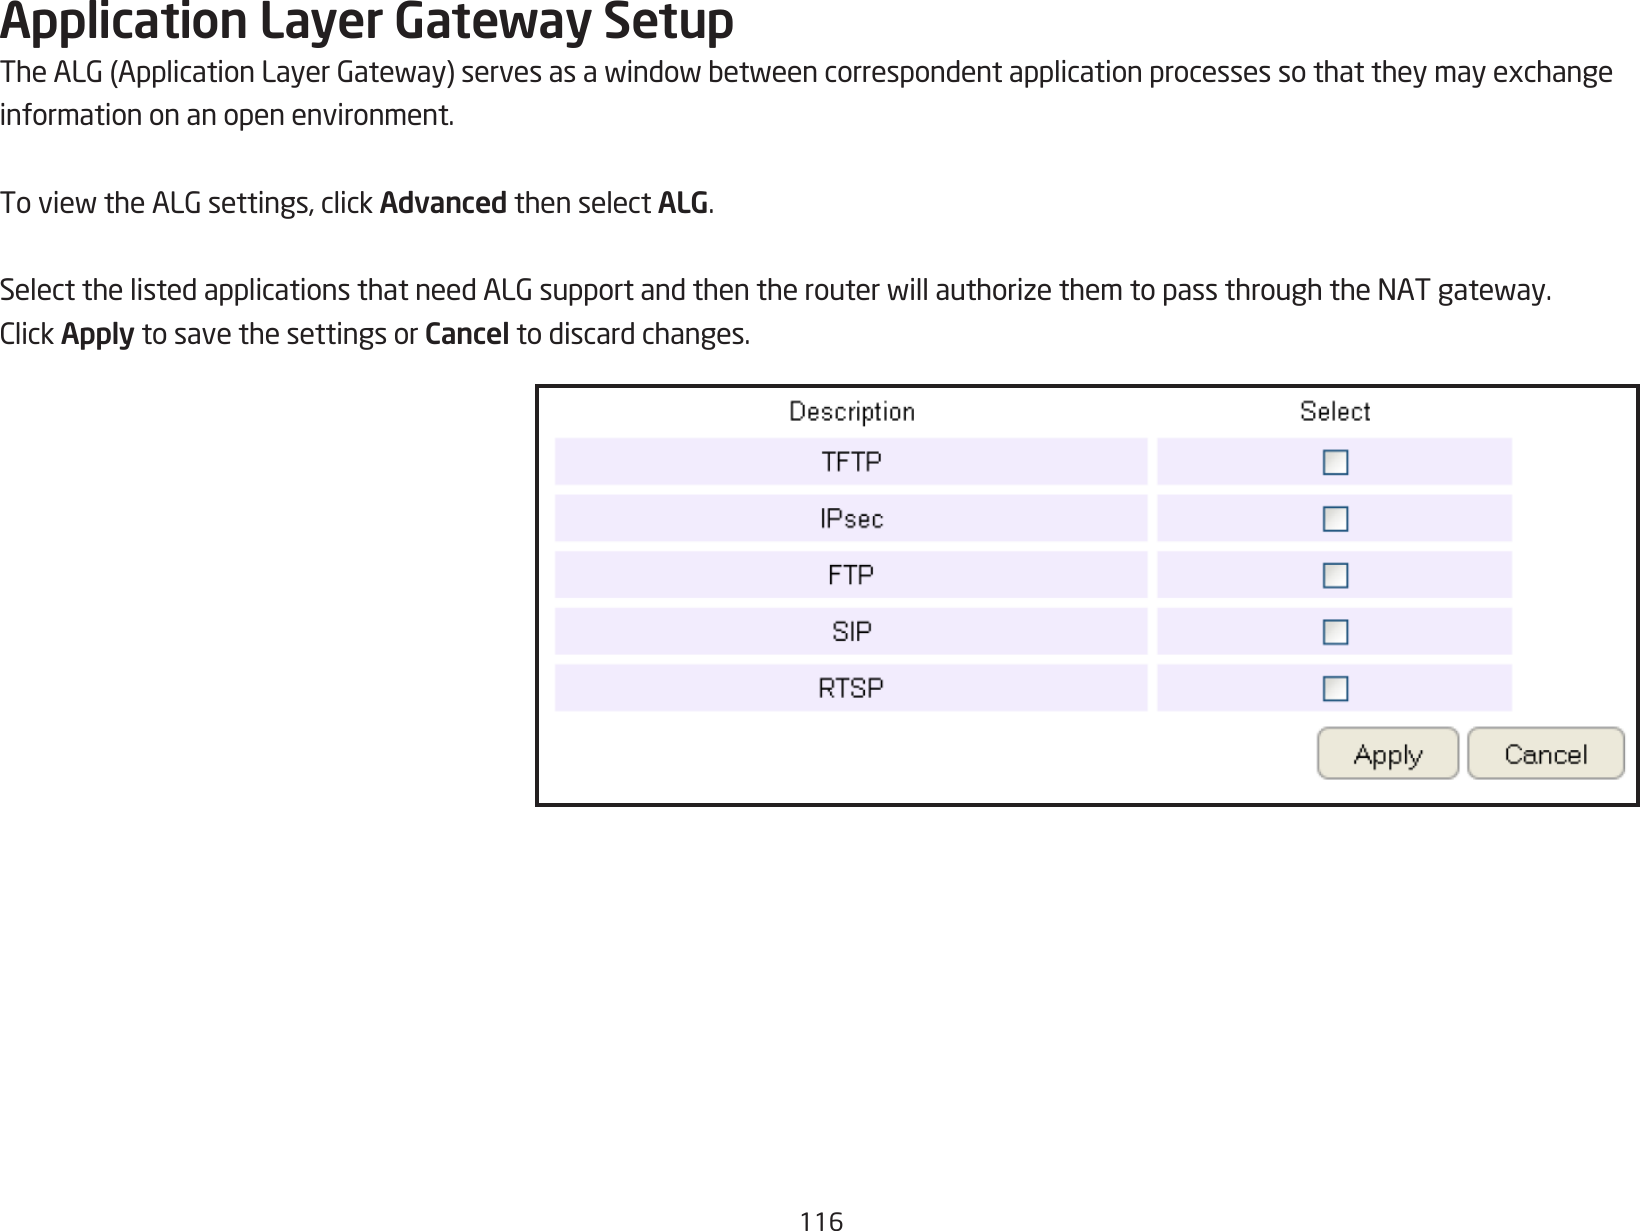 116Application Layer Gateway SetupTheALG(ApplicationLayerGateway)servesasawindowbetweencorrespondentapplicationprocessessothattheymayexchangeinformation on an open environment.ToviewtheALGsettings,clickAdvanced then select ALG.SelectthelistedapplicationsthatneedALGsupportandthentherouterwillauthorizethemtopassthroughtheNATgateway.ClickApply to save the settings or Cancel to discard changes.